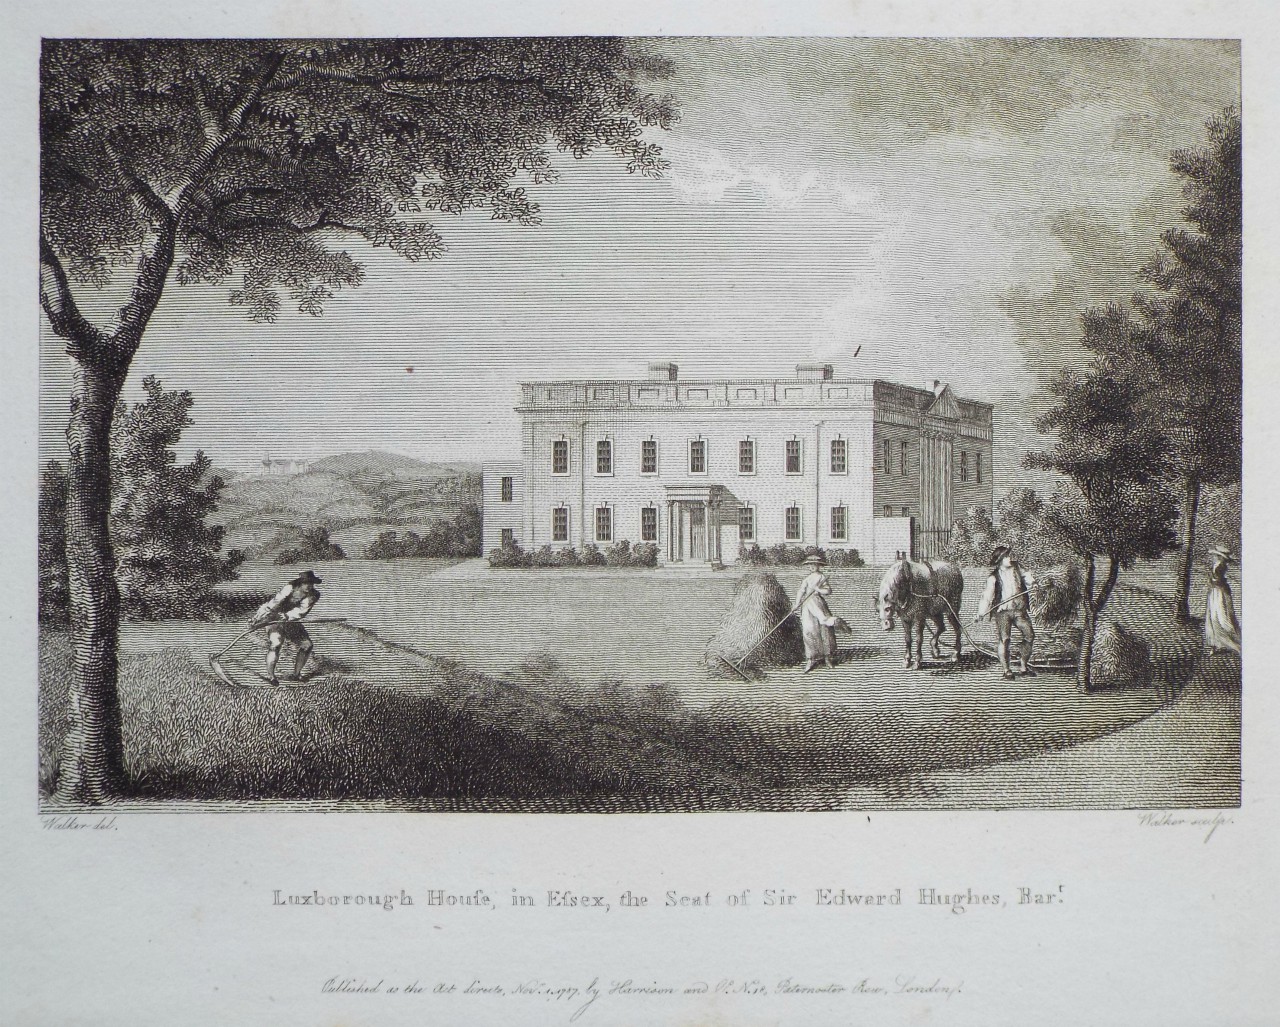 Print - Luxborough House, in Essex, the Seat of Sir Edward Hughes, Bart. - 